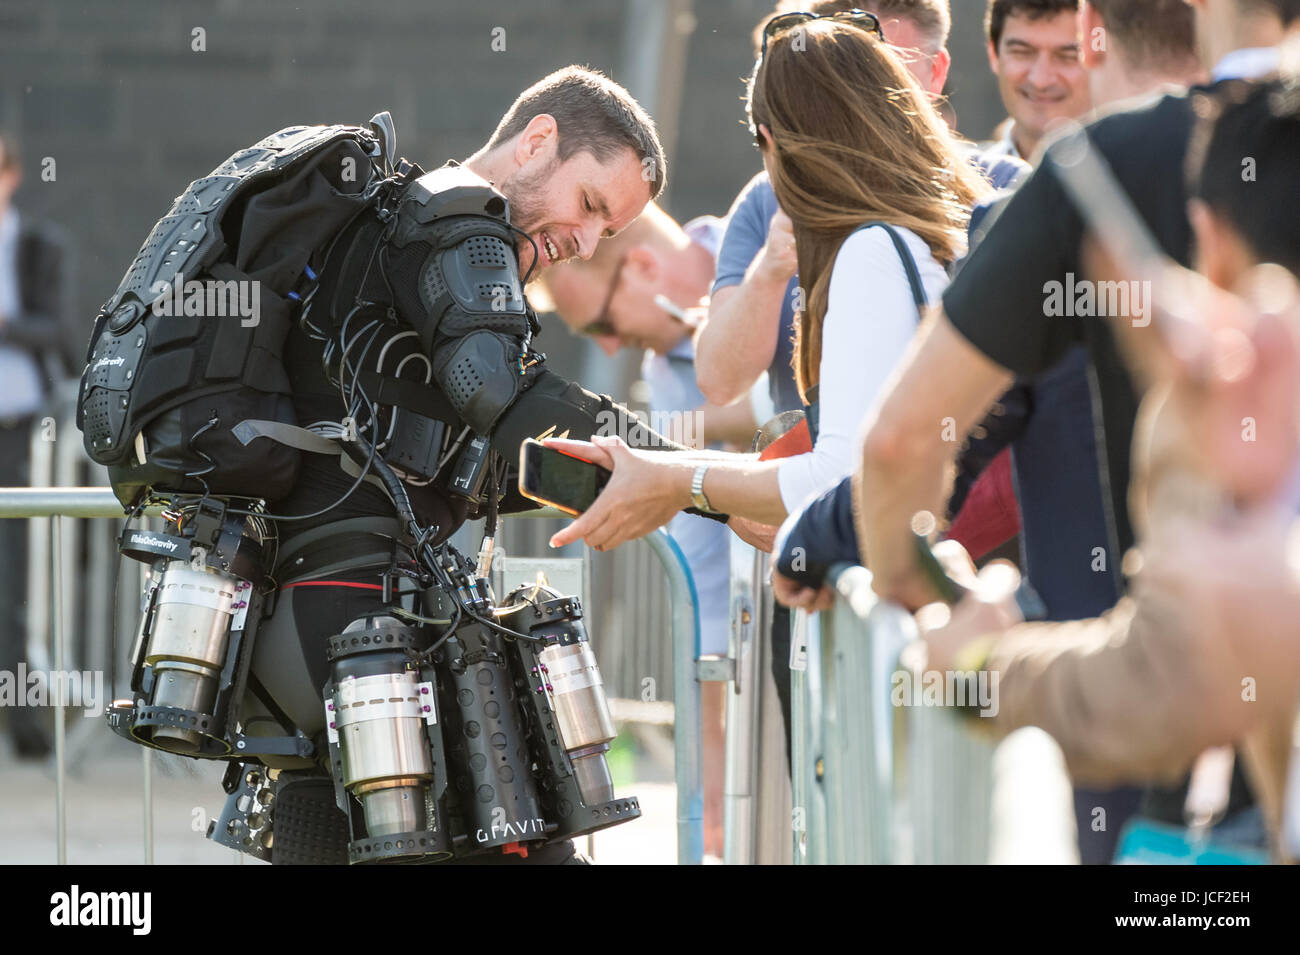 London, UK. 14th June, 2017. Richard Browning 'Iron Man', founder of Gravity, makes a flight in his jet powered flight suit during London Tech Week at Victoria Dock Square. © Guy Corbishley/Alamy Live News Stock Photo